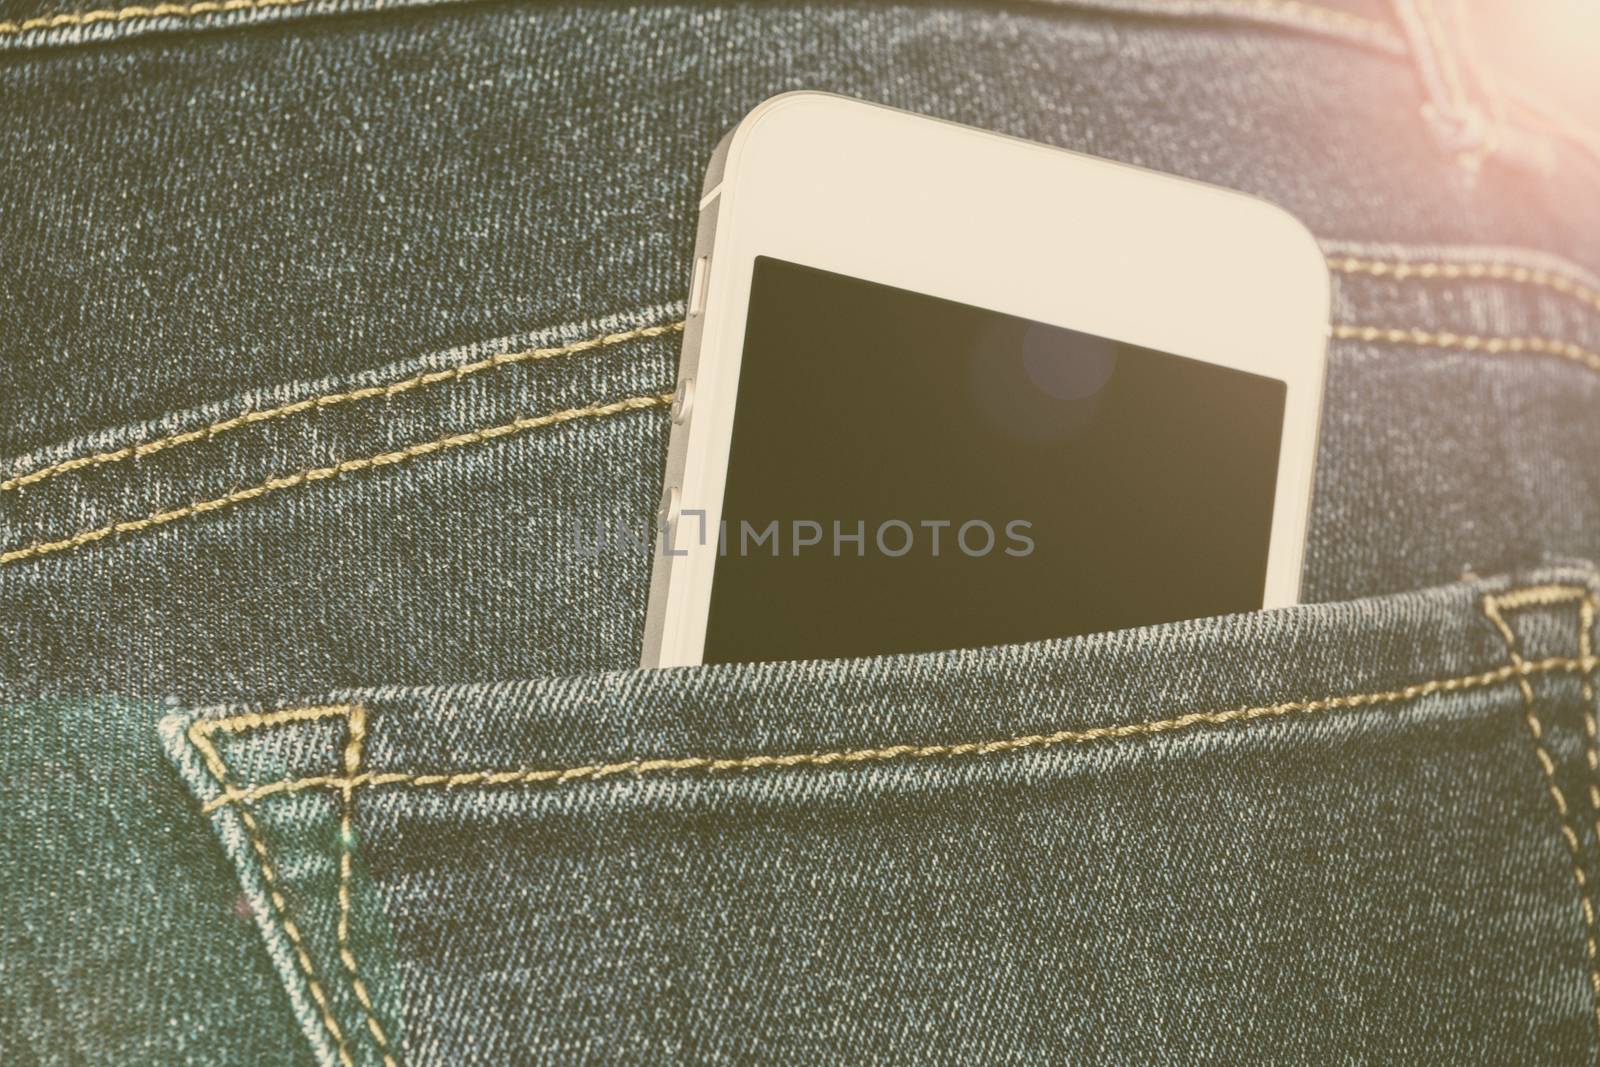 Smartphone in a jeans pocket by wdnet_studio